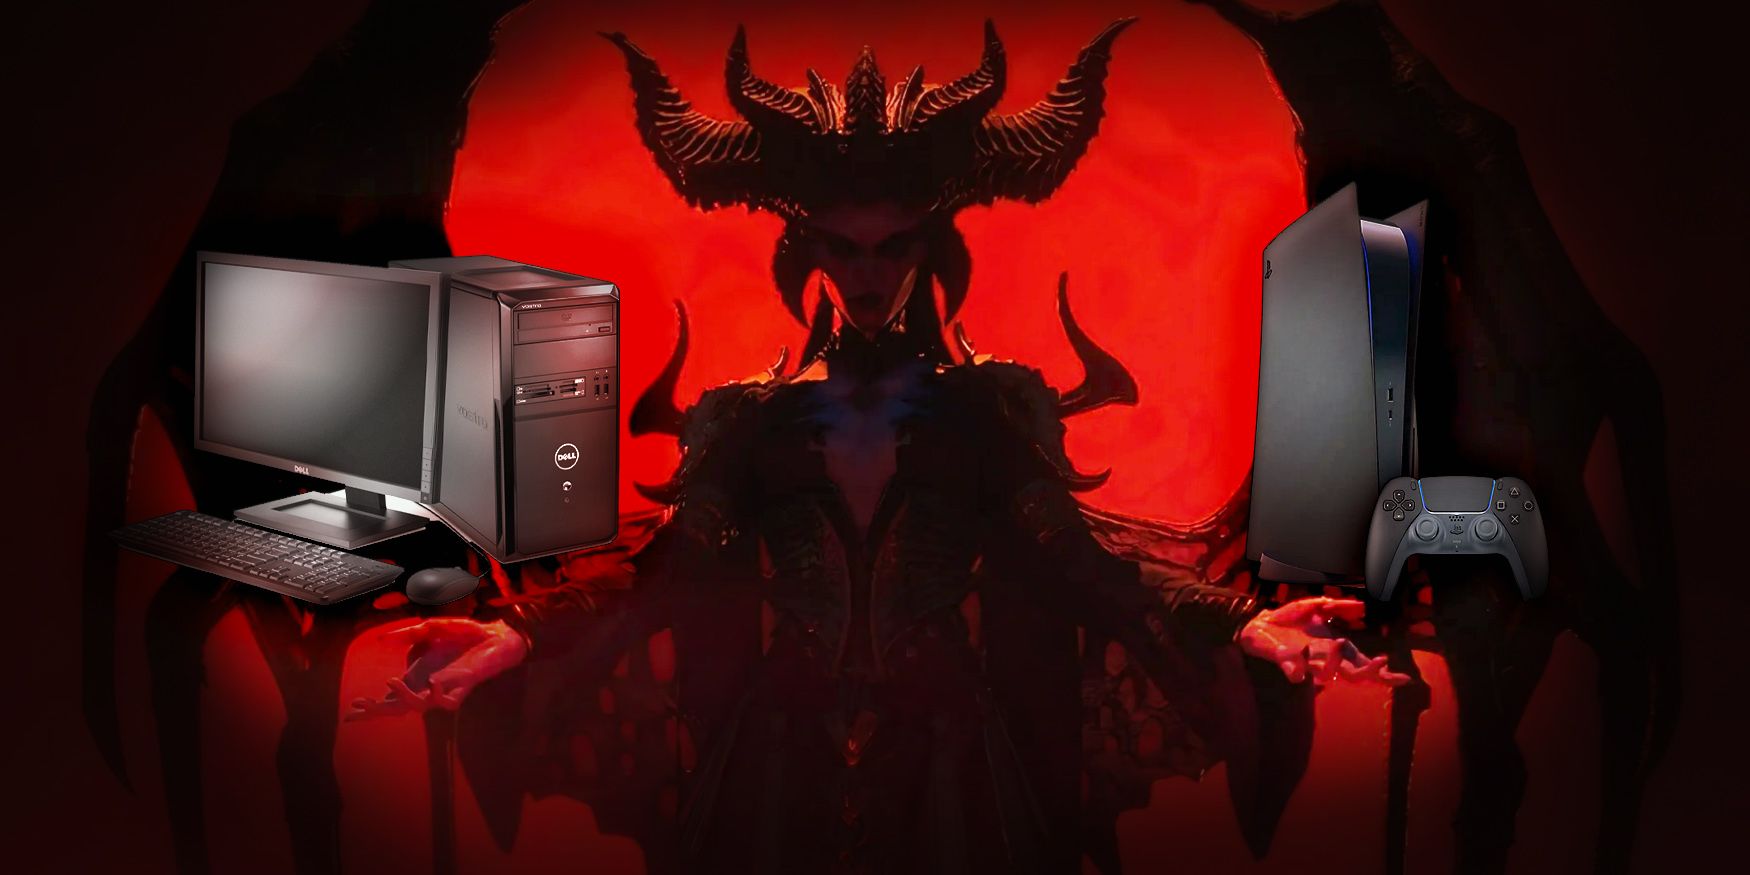 Main diablo 4 lilith image with hands outstretched and a PC and console balanced one each